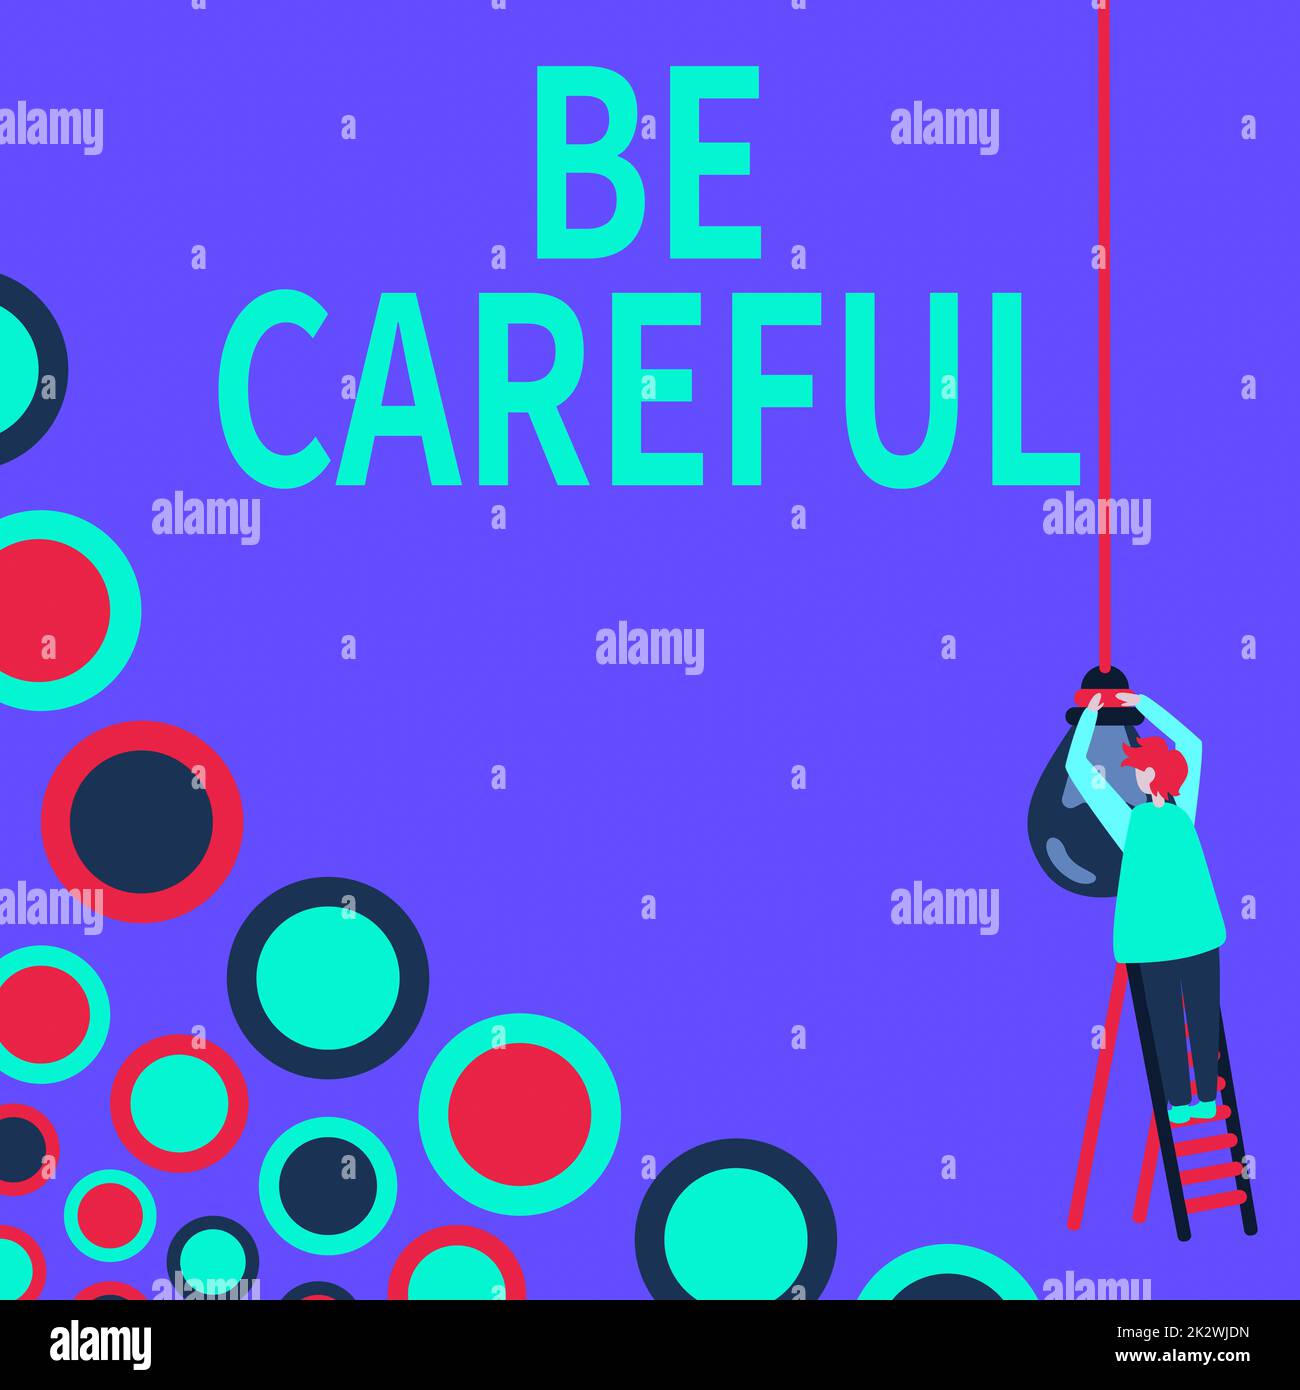 Sign displaying Be Careful. Internet Concept making sure of avoiding potential danger mishap or harm Businessman Standing Ladder Fixing Light Bulb Generating New Futuristic Ideas. Stock Photo